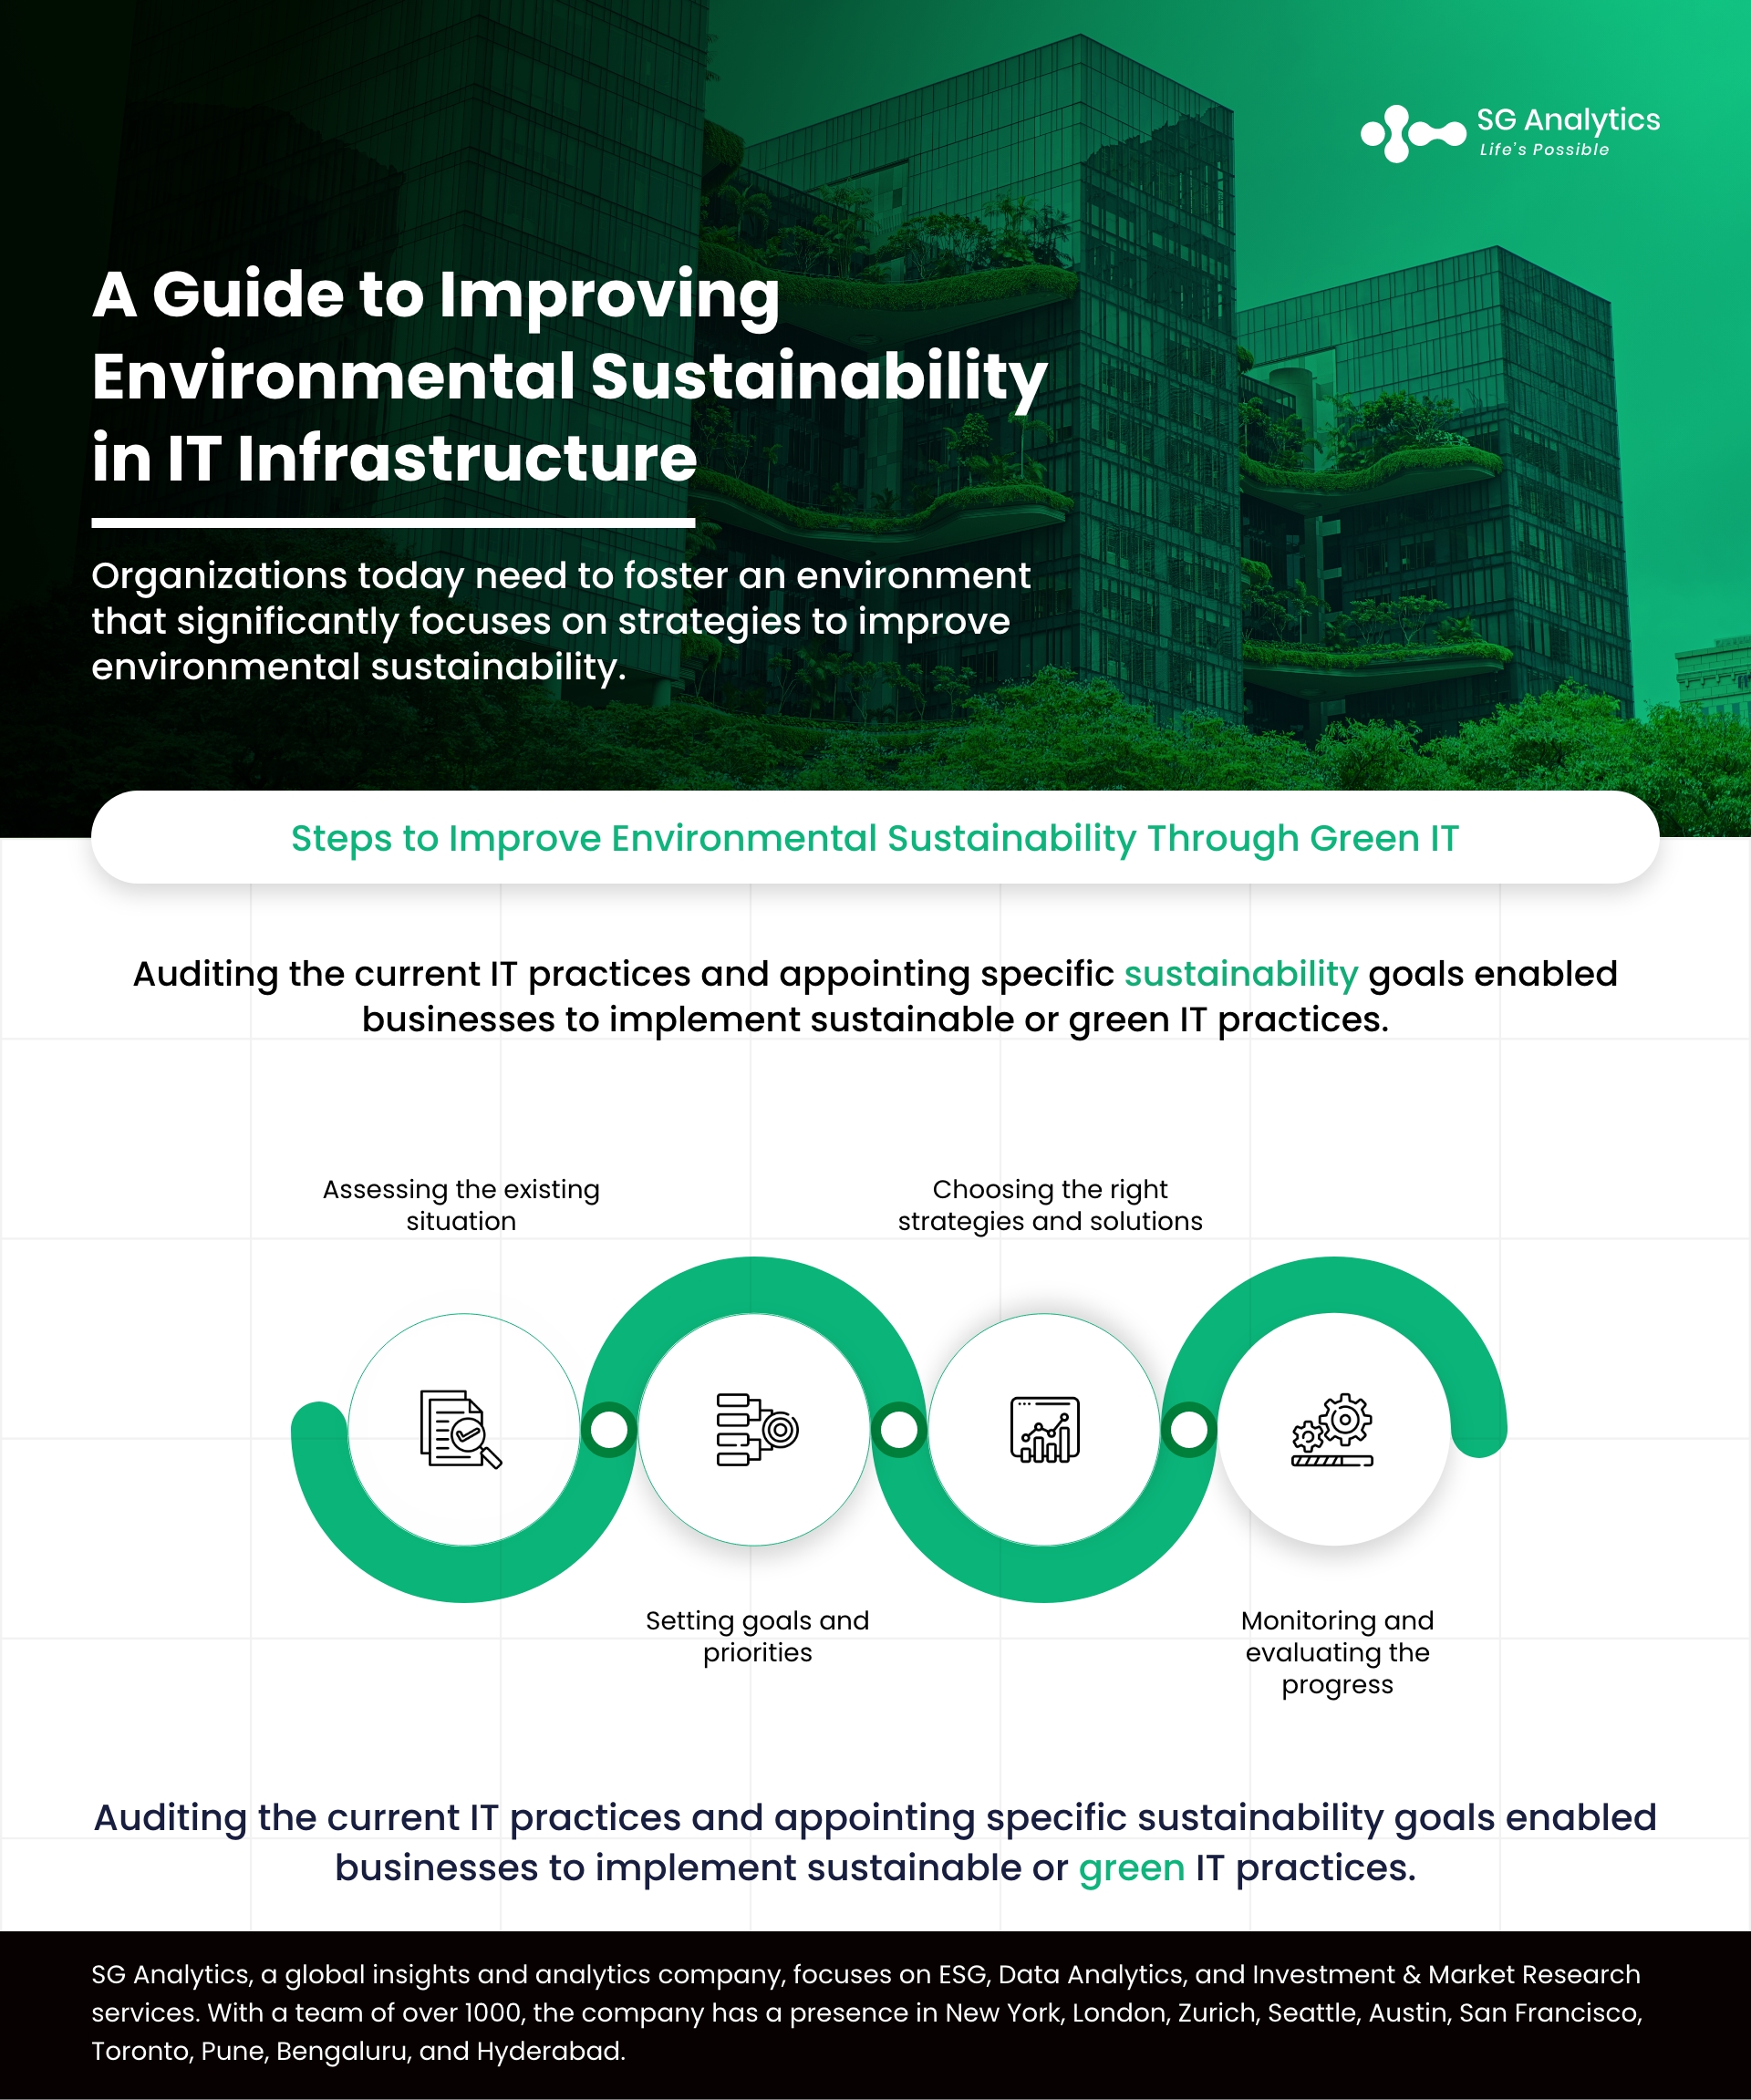 A Guide to Improving Environmental Sustainability in IT Infrastructure